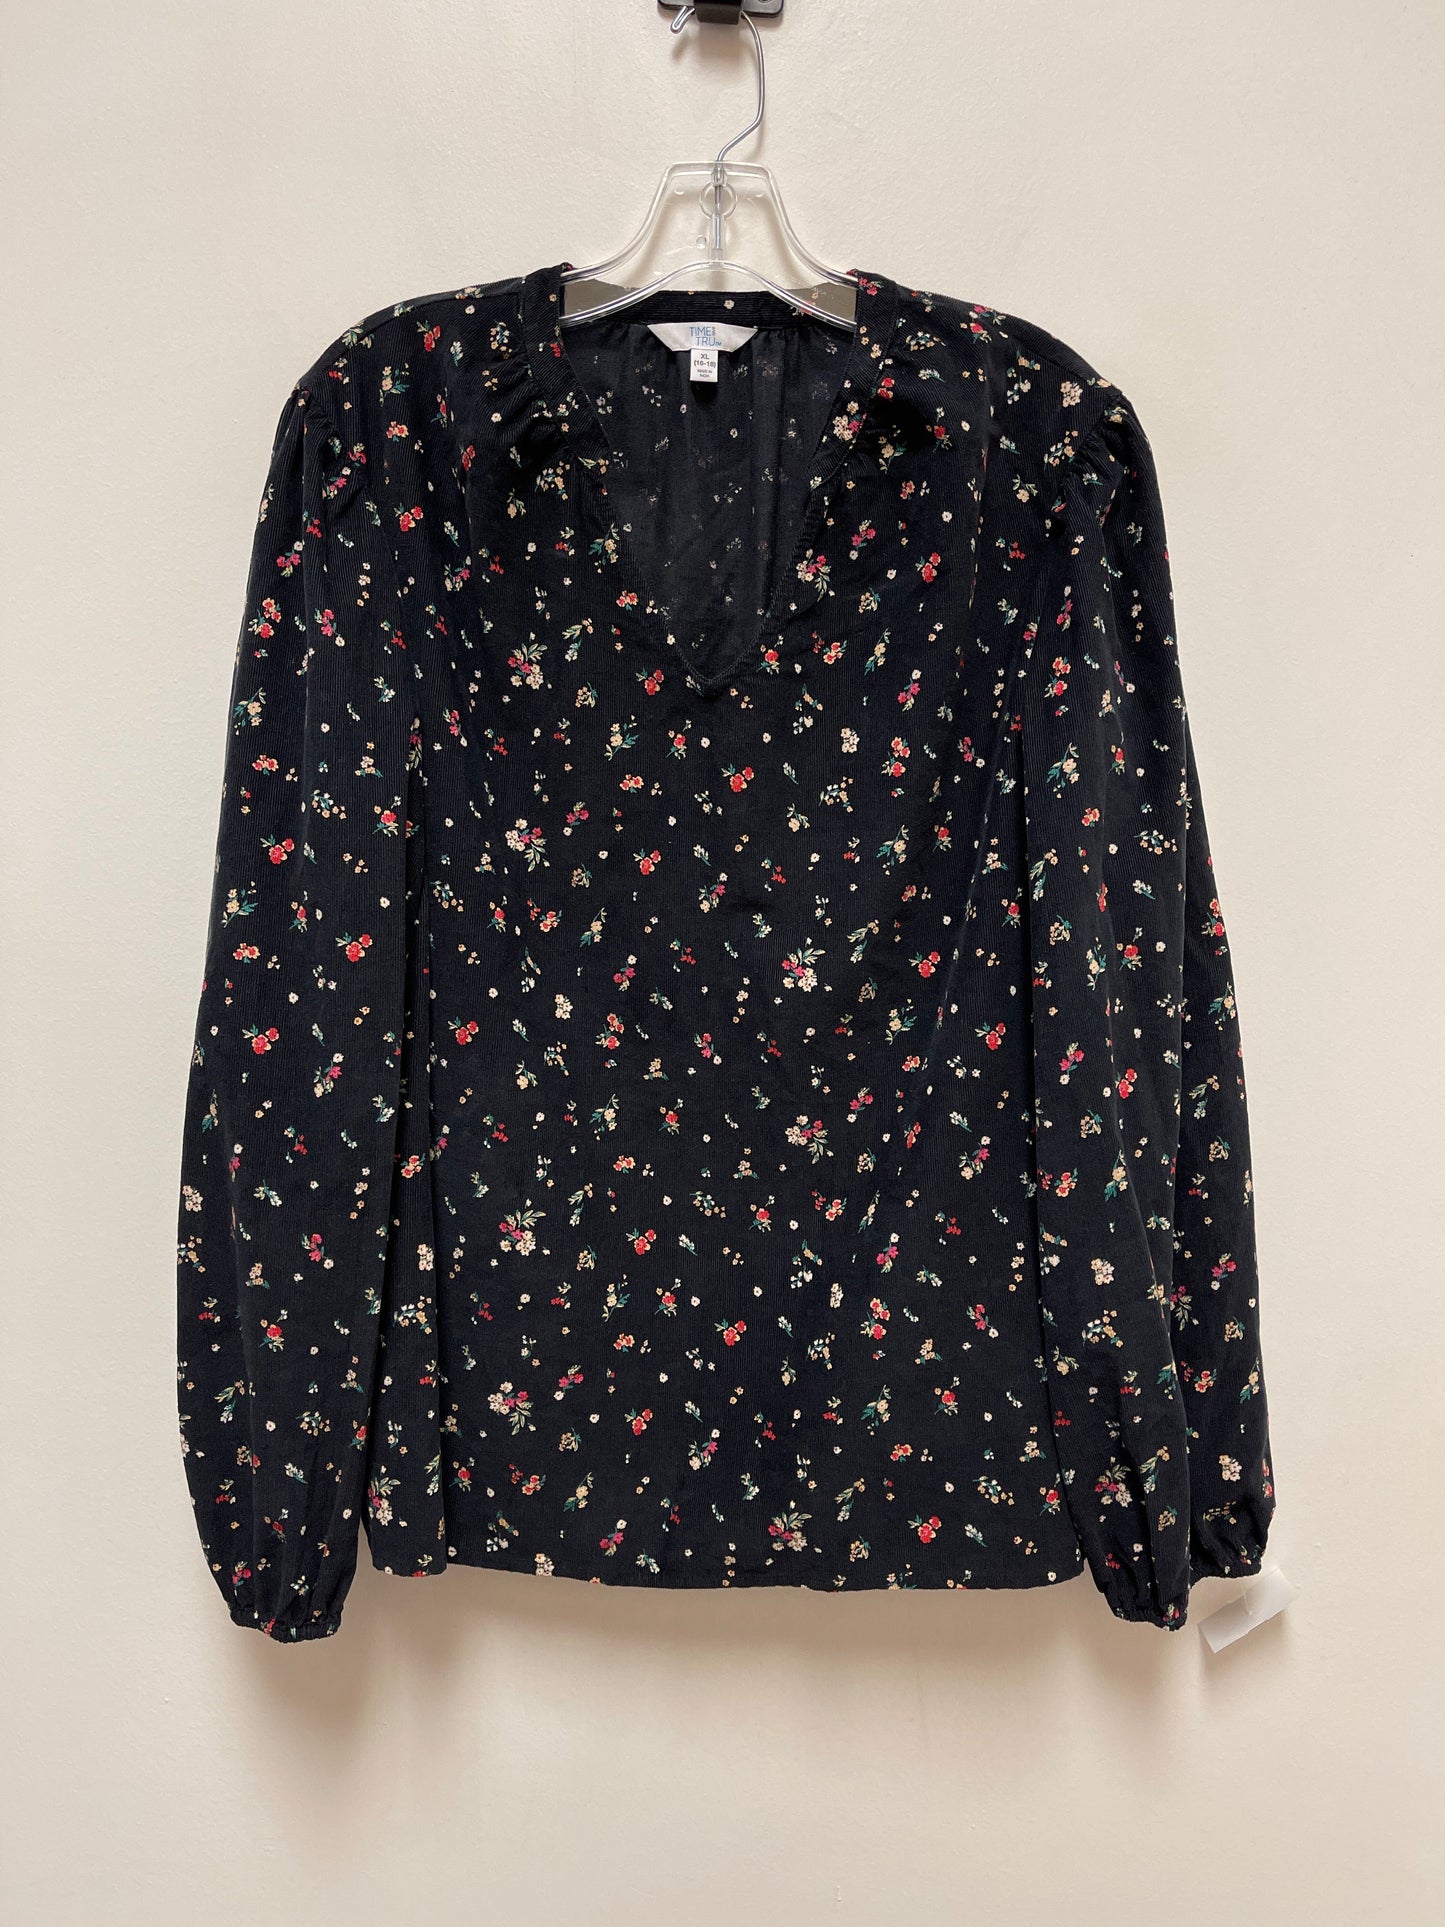 Floral Print Top Long Sleeve Time And Tru, Size Xl